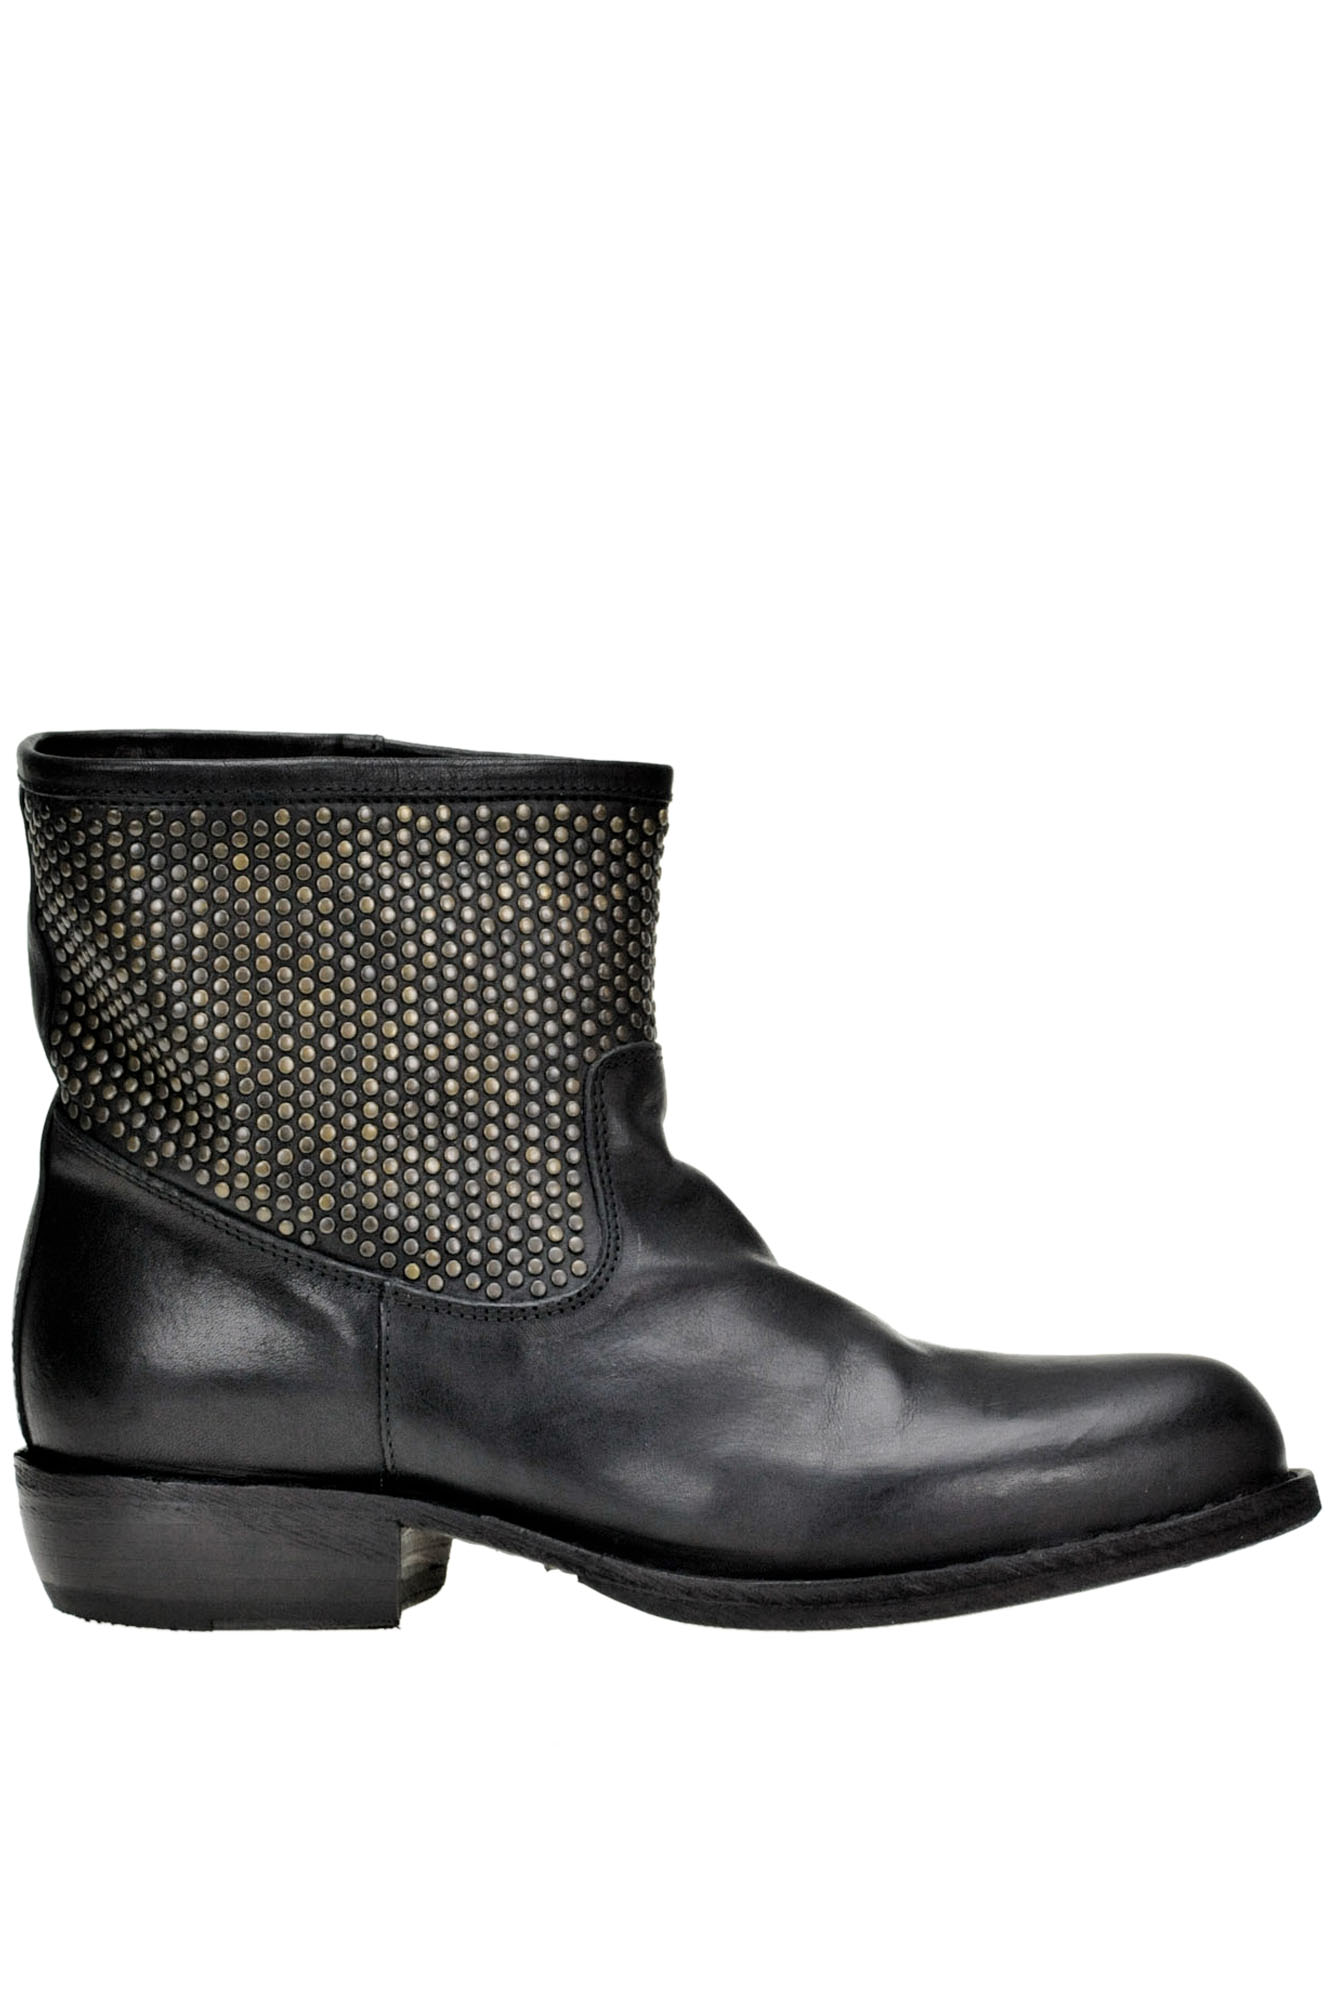 Fiorentini + Baker Calu Studded Leather Boots In Black